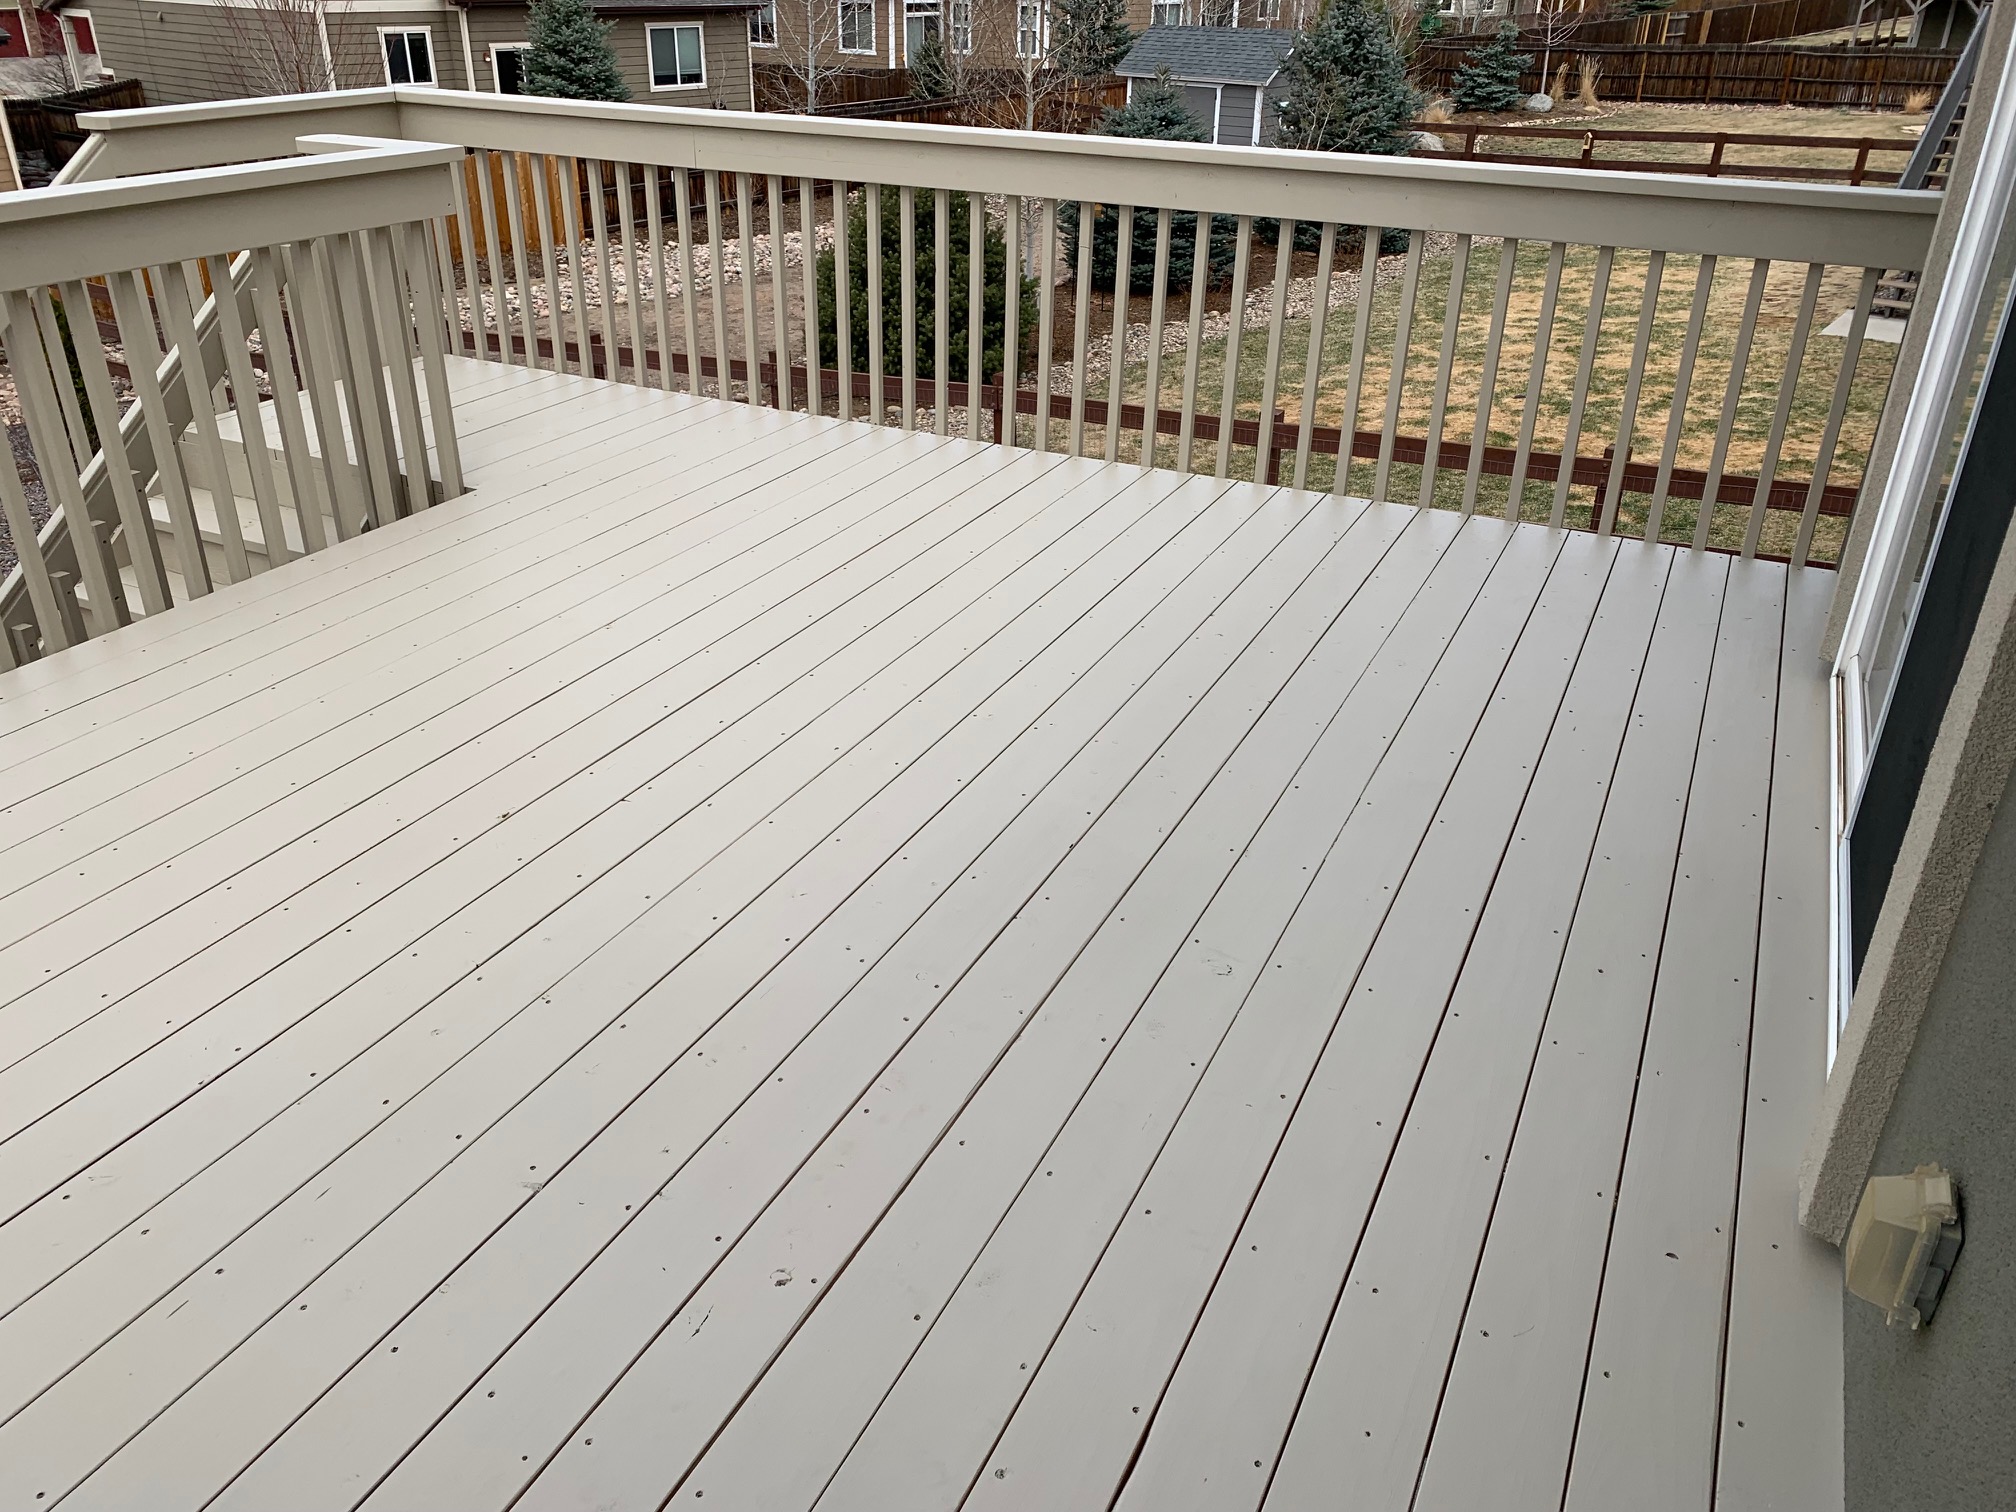 Redwood deck with picket fence railing and drink cap. Stained in a solid-body stain (Kwal Johnston).